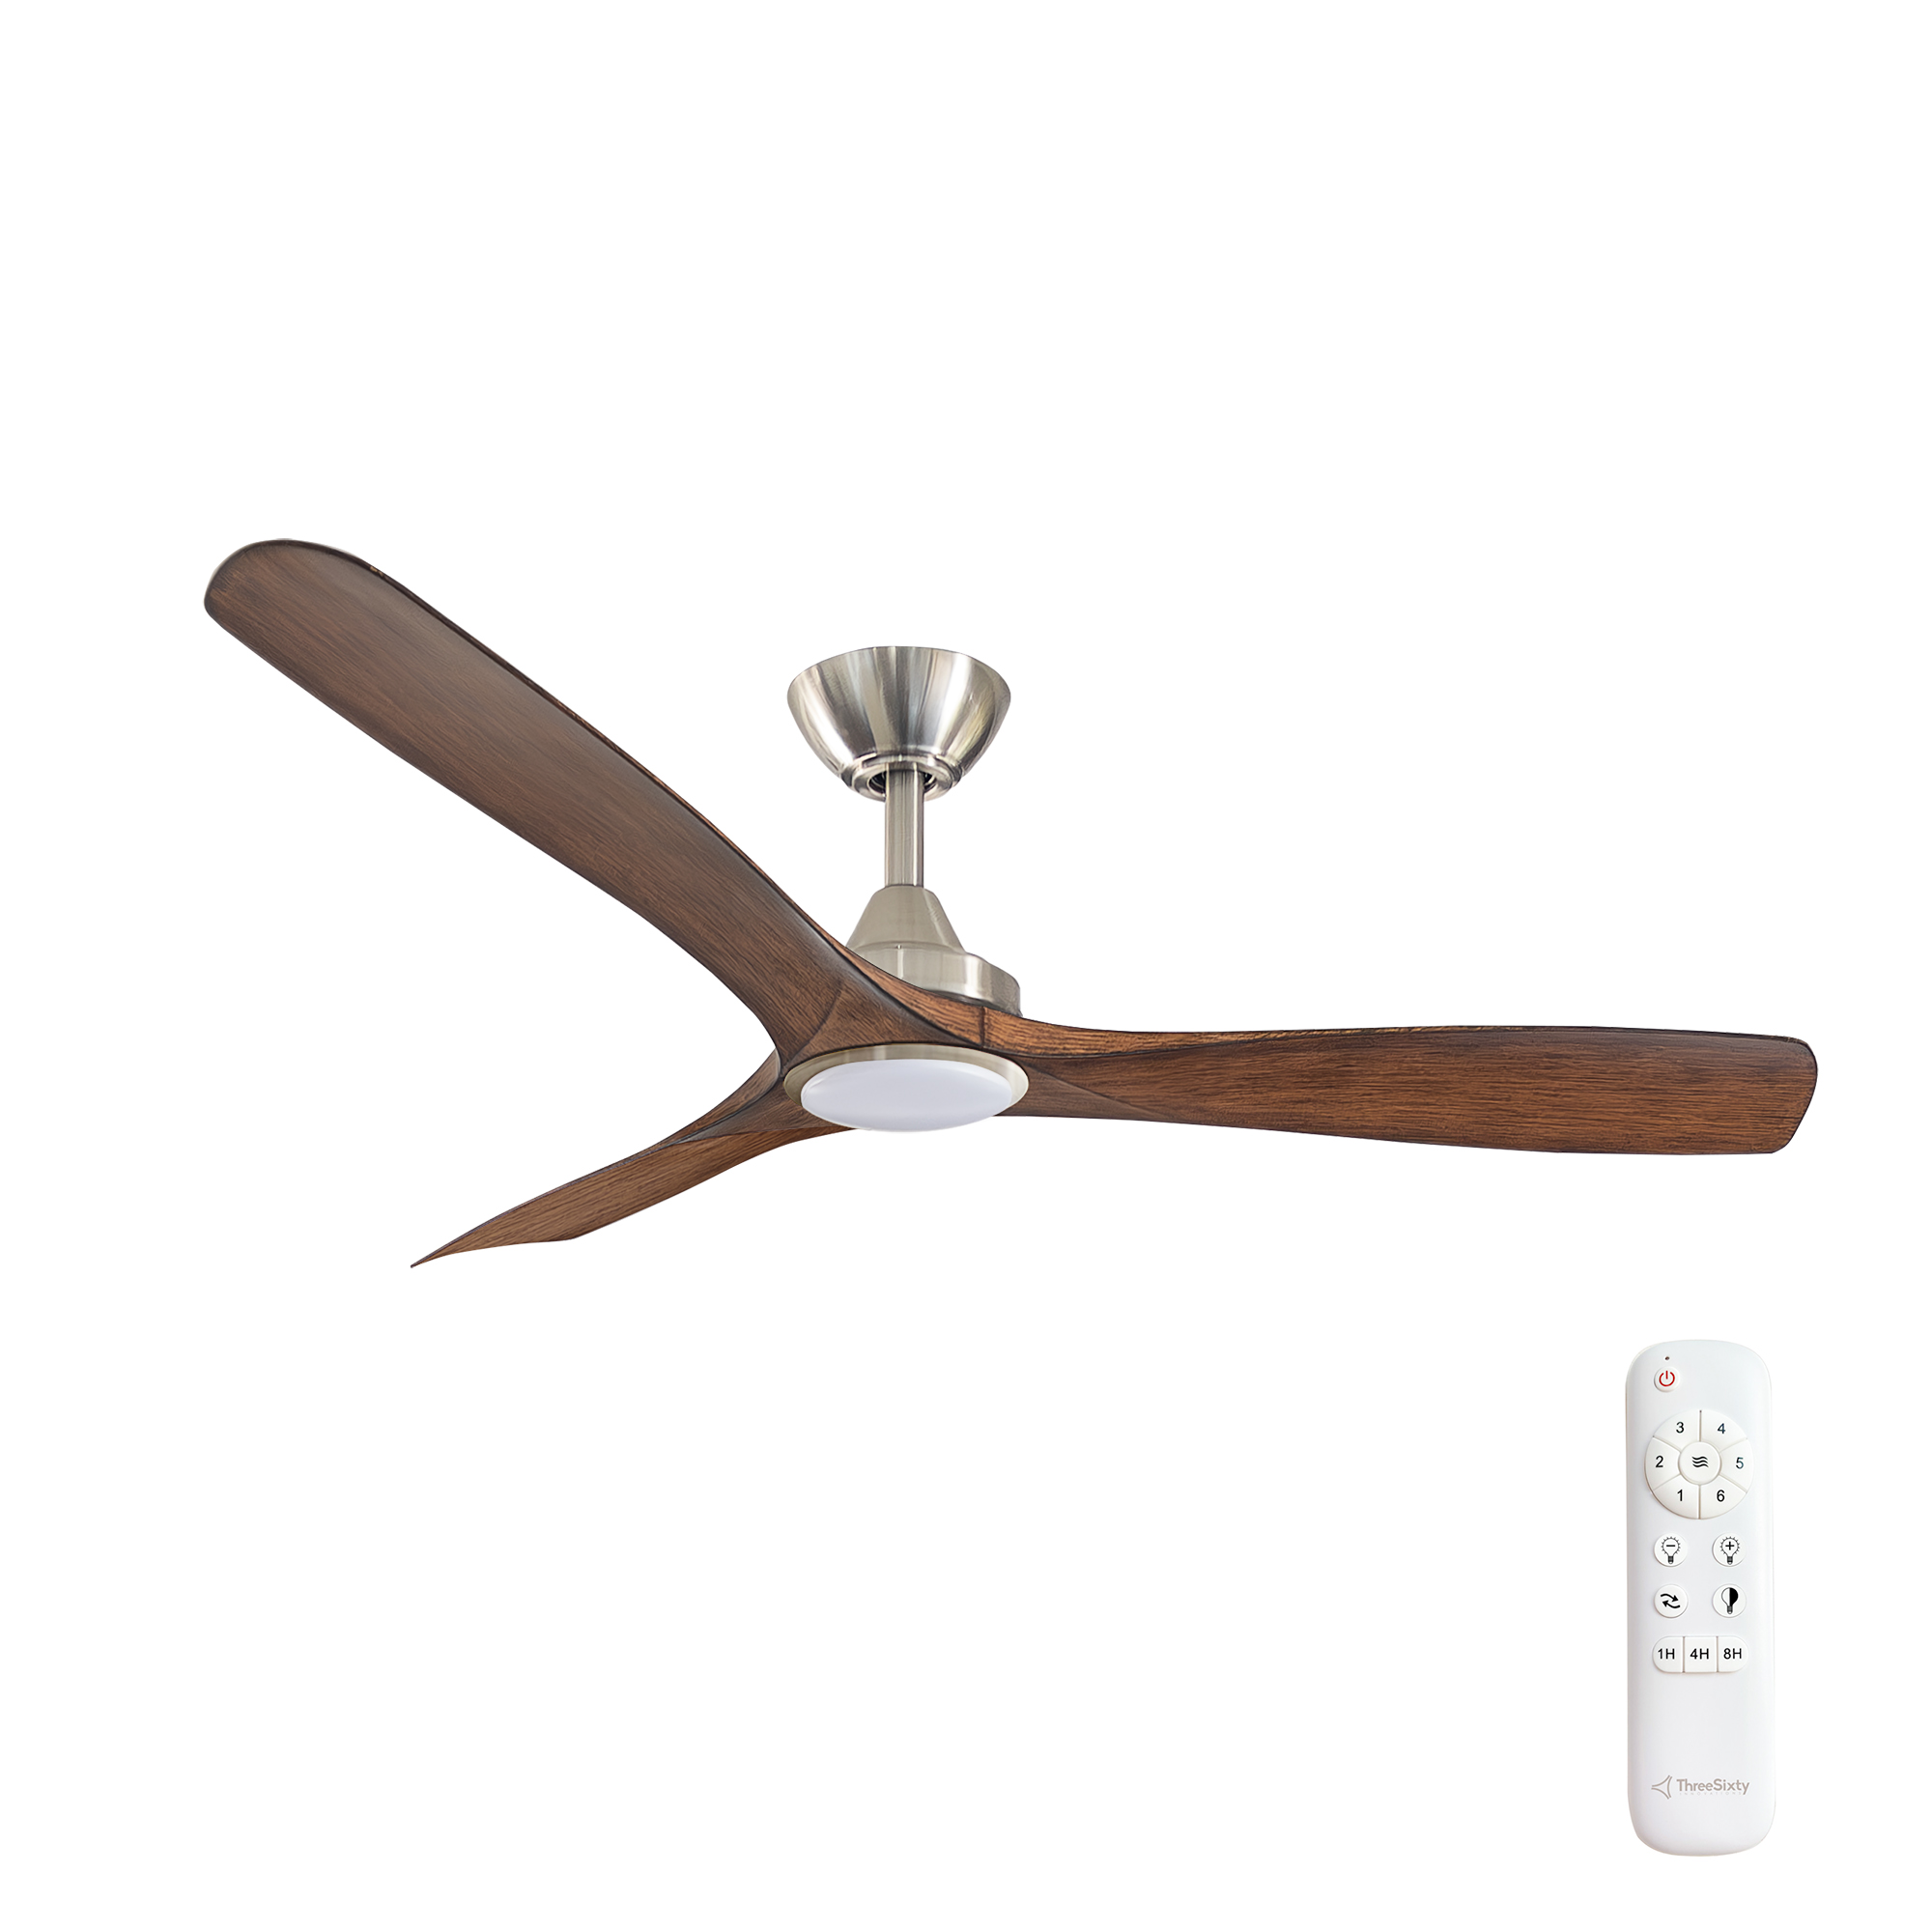 52" Spitfire DC Ceiling Fan in Brushed Nickel with Koa blades and 18W CCT LED Light